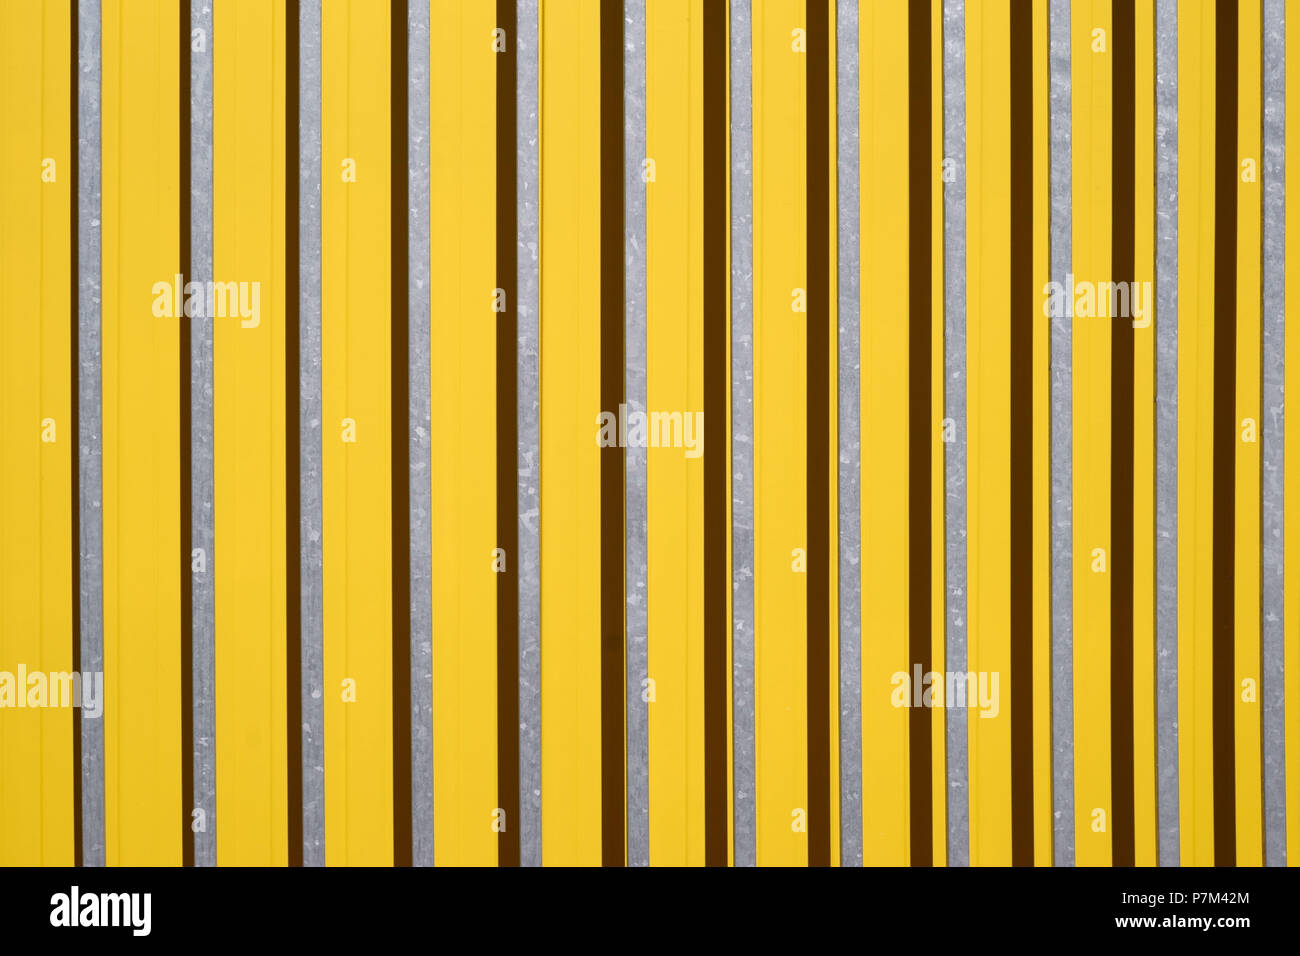 Side view of a color intensive corrugated iron wall of a shopping center with bars in front of the wall. Stock Photo